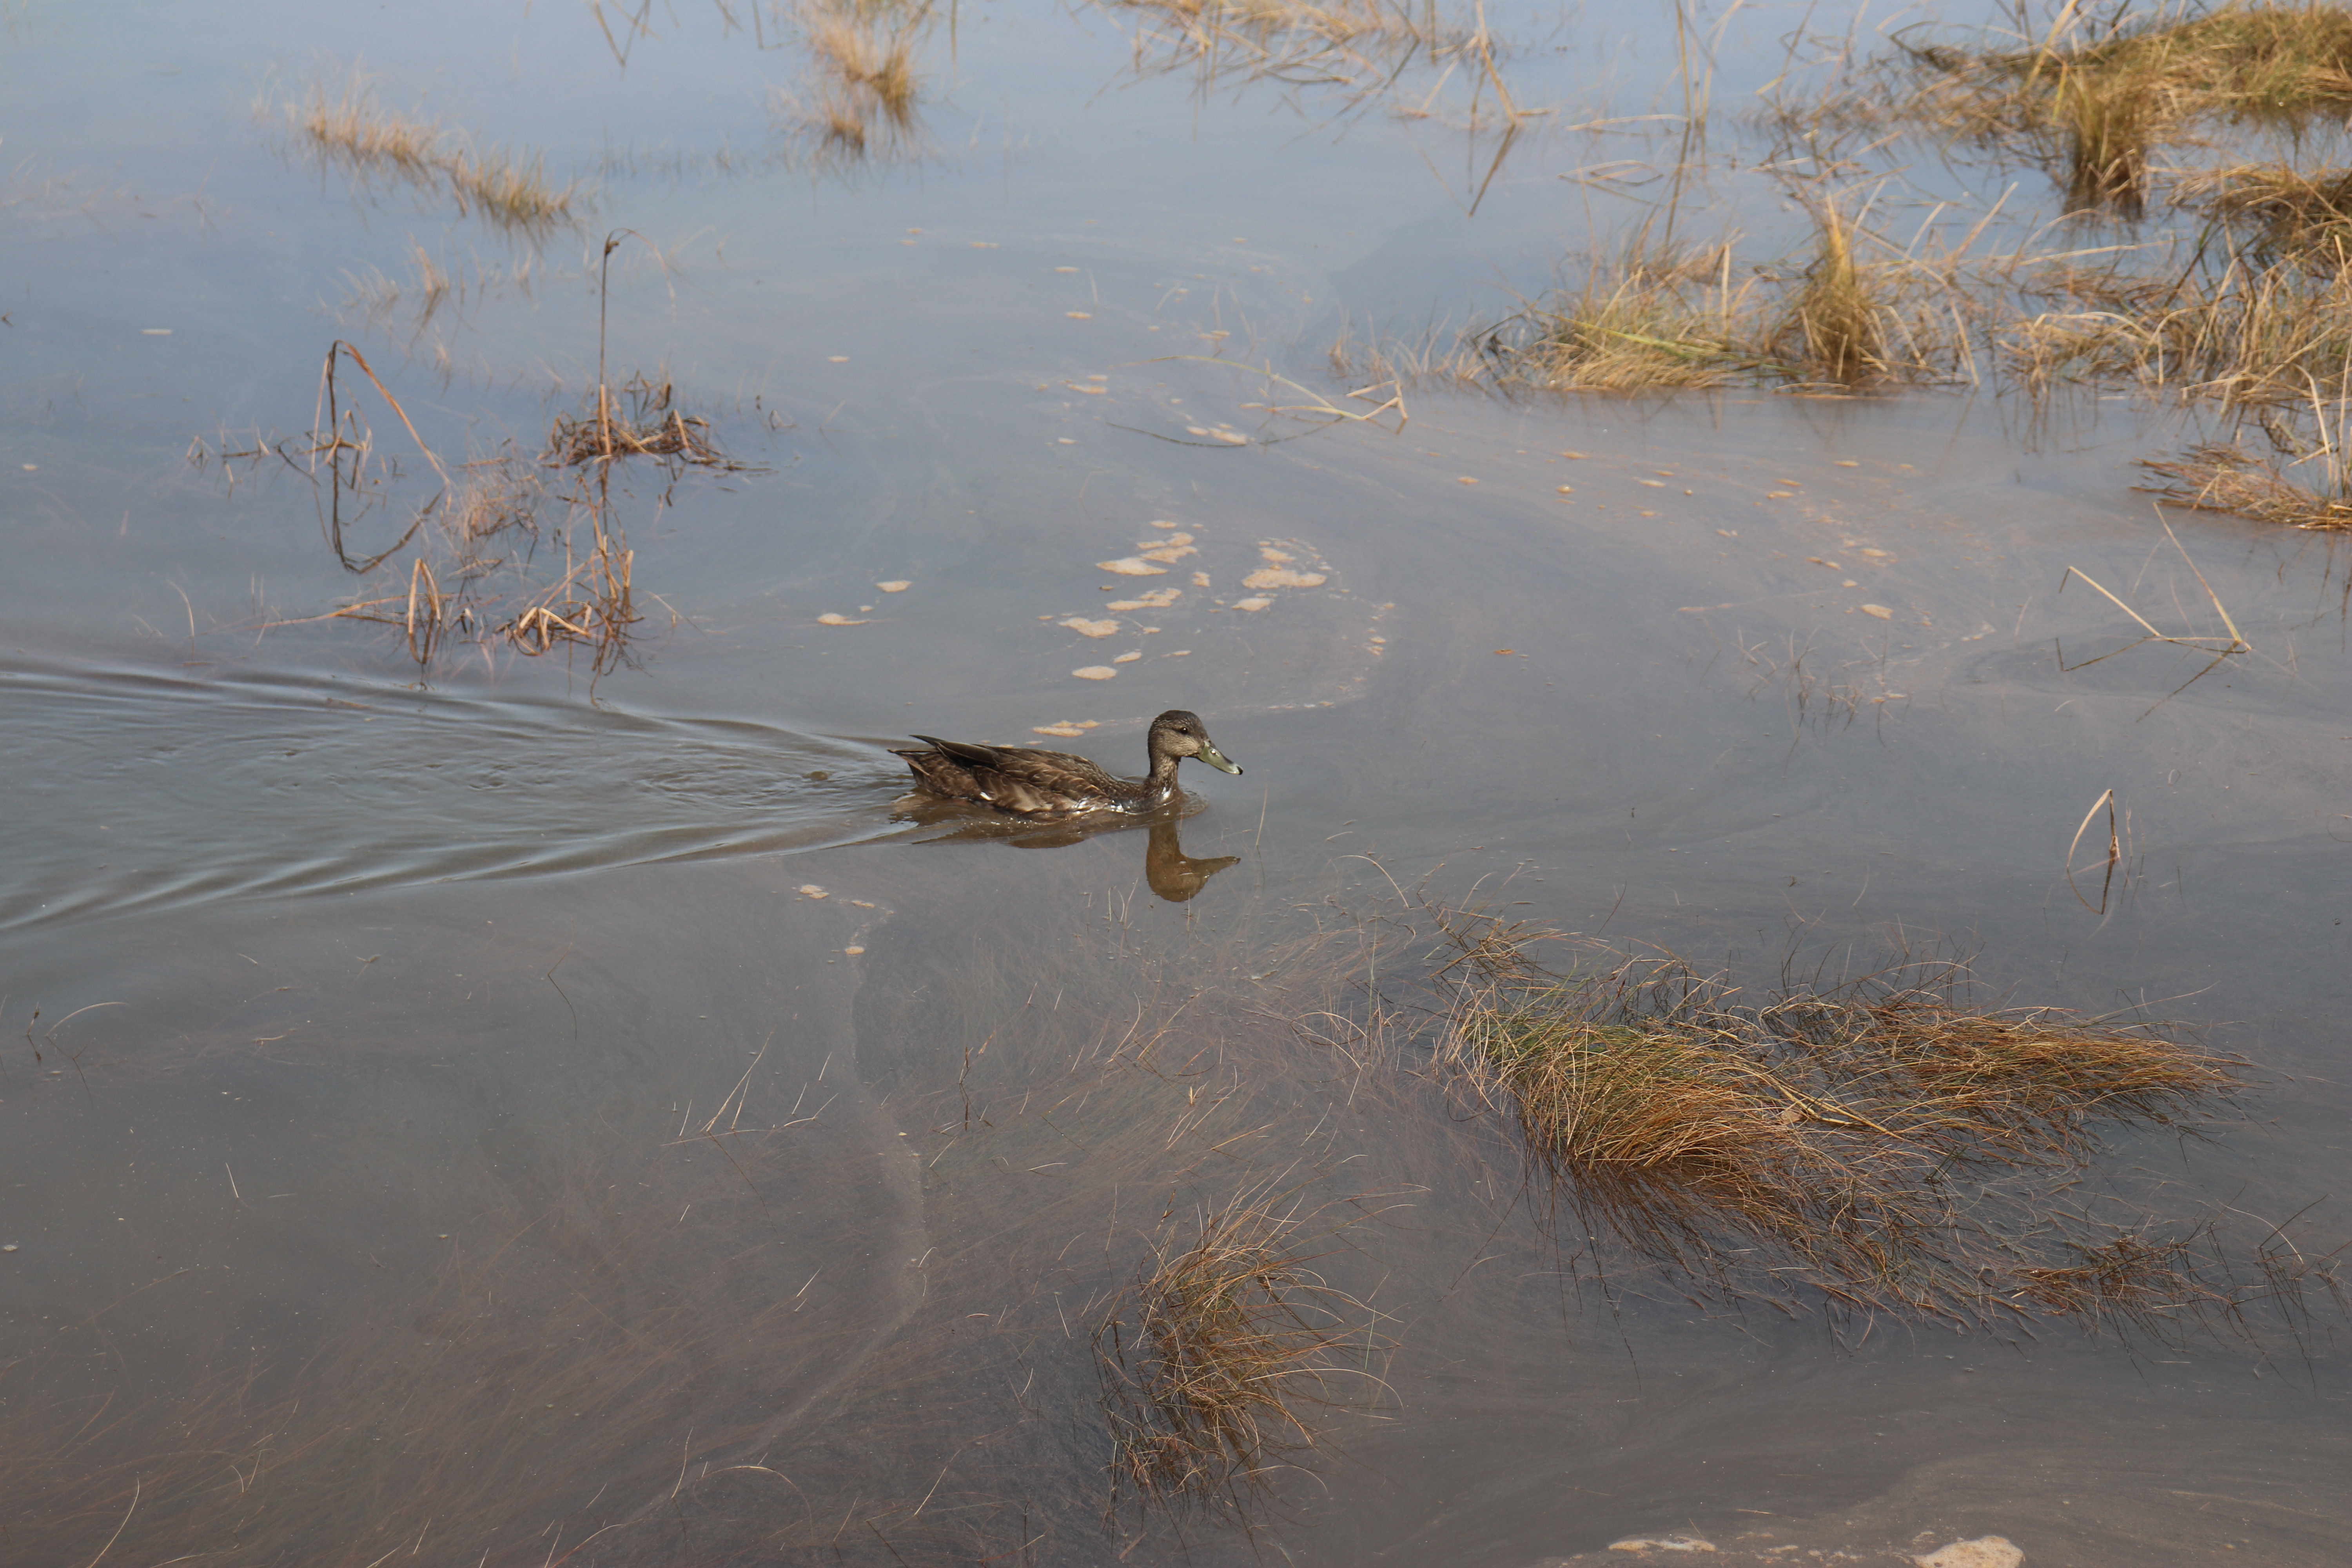 Ducks Unlimited Canada presents – Some of our wetlands' most